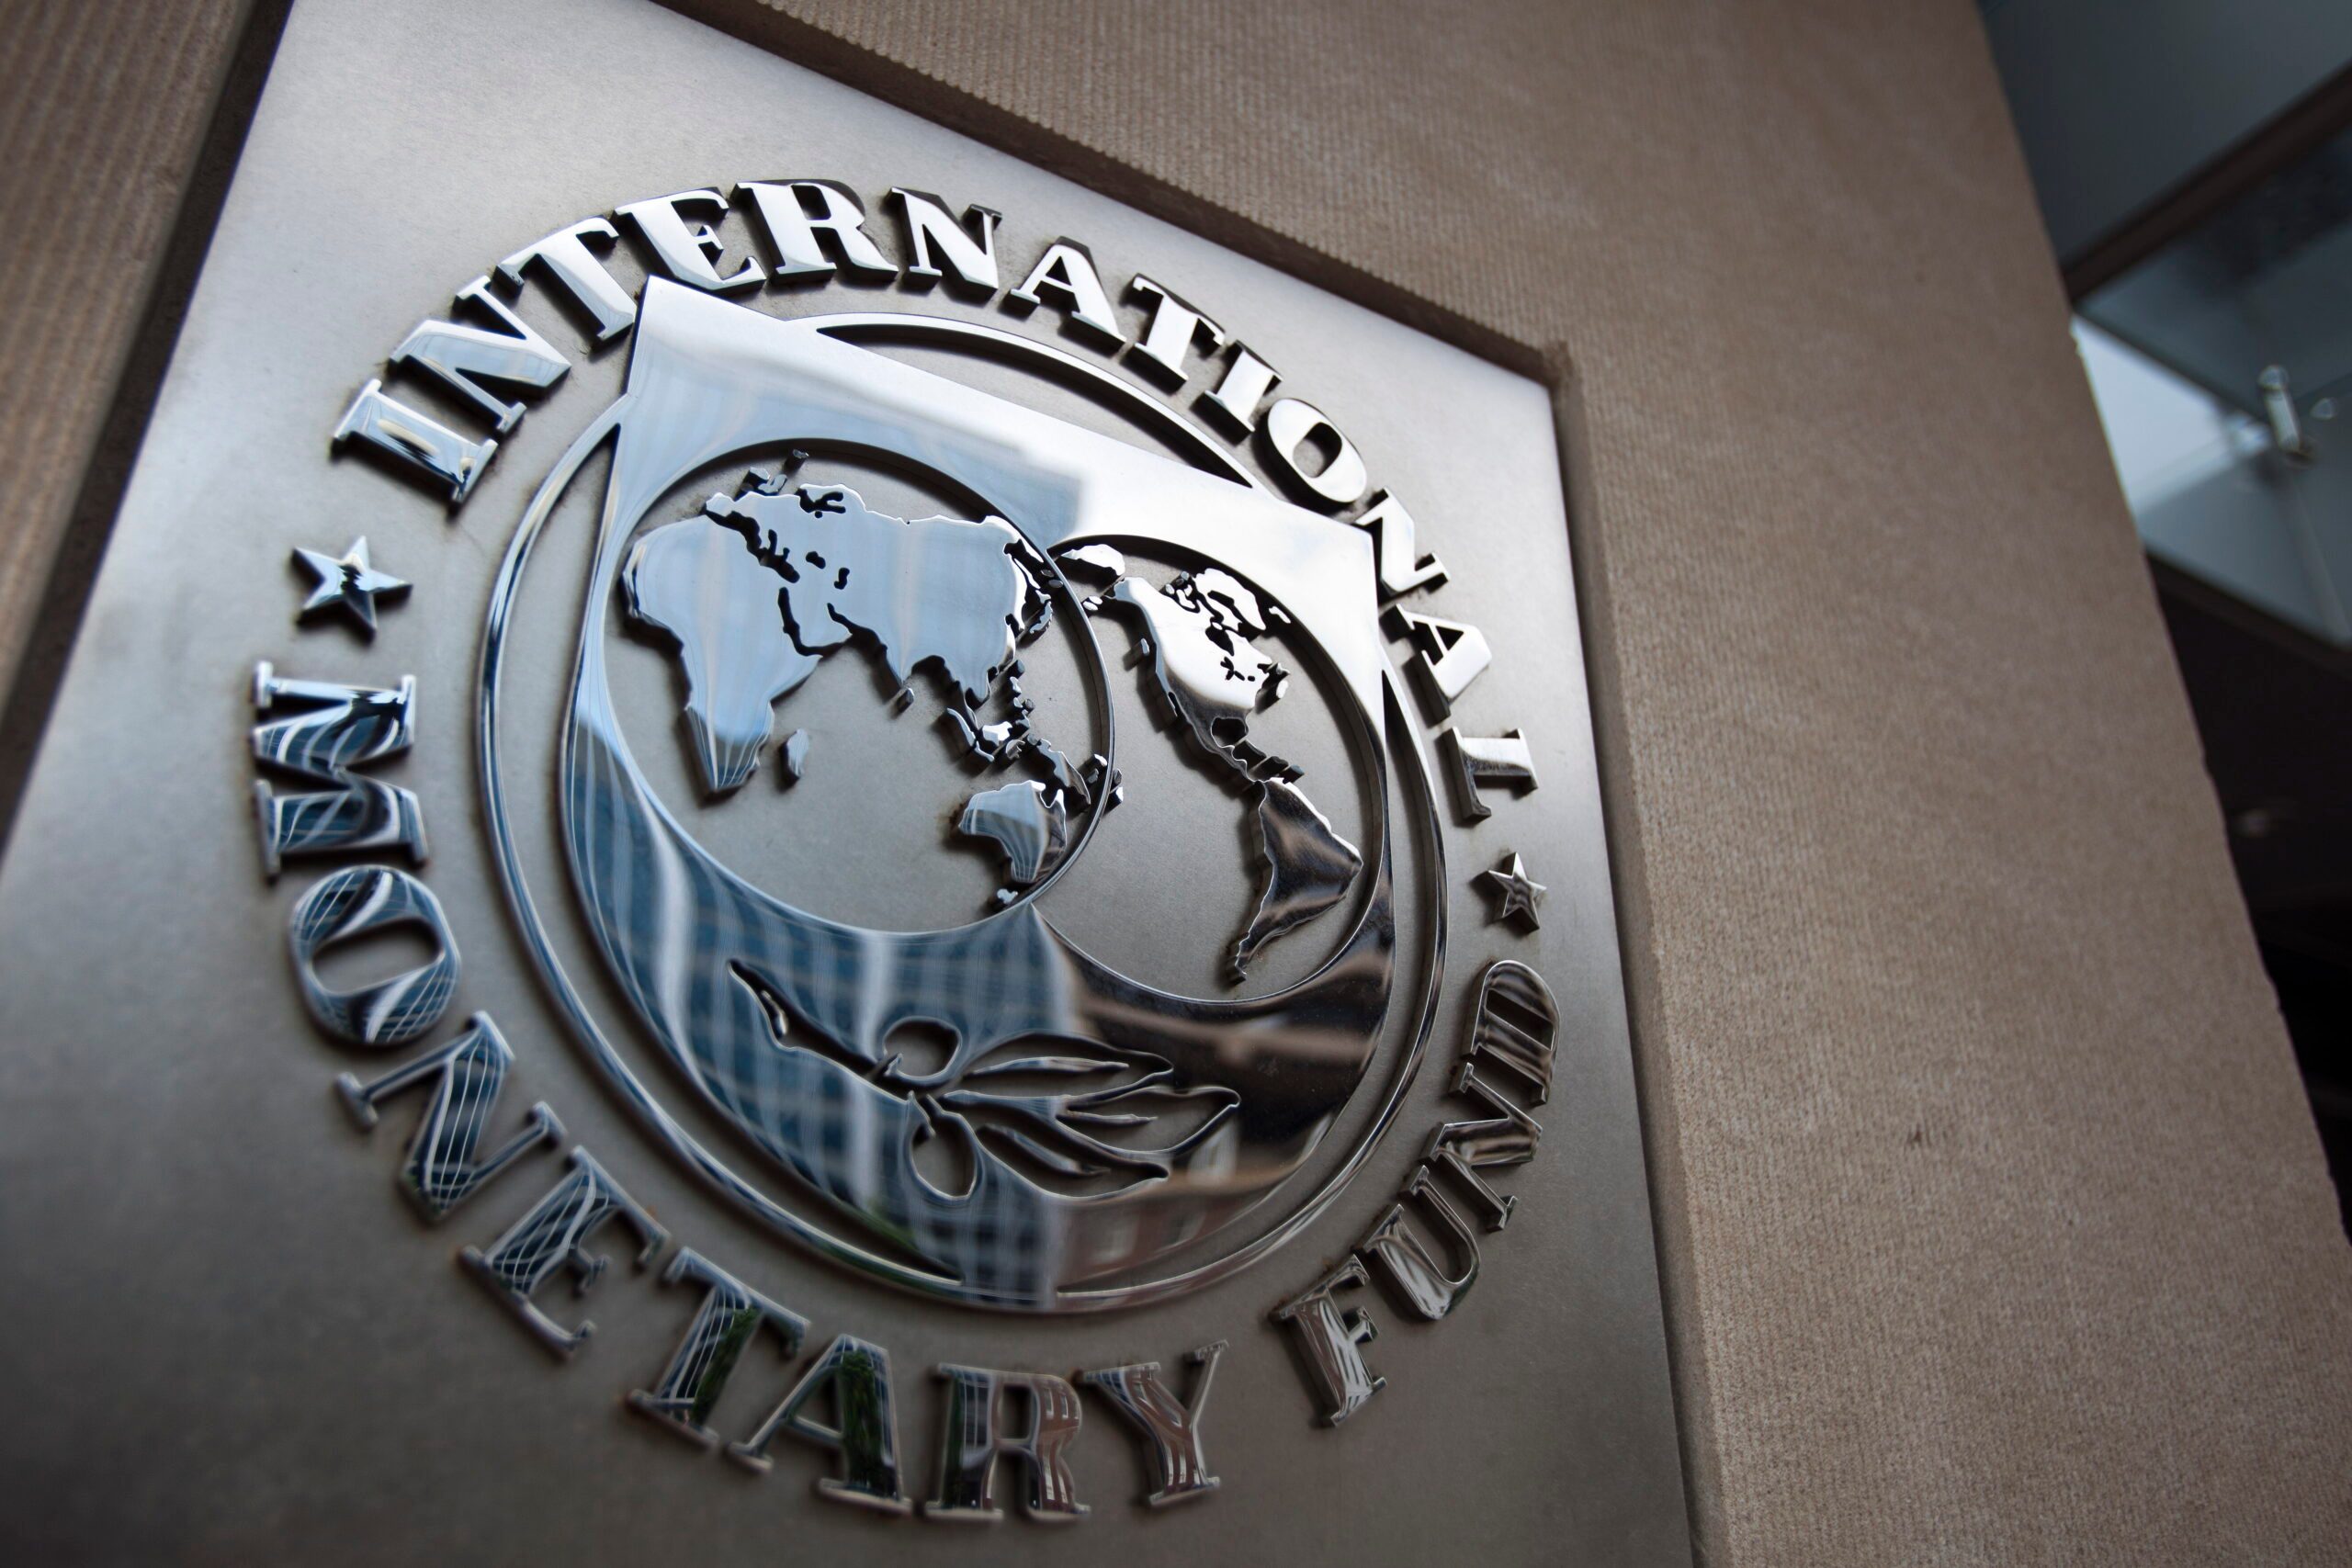 IMF economists question faith in neoliberal doctrine